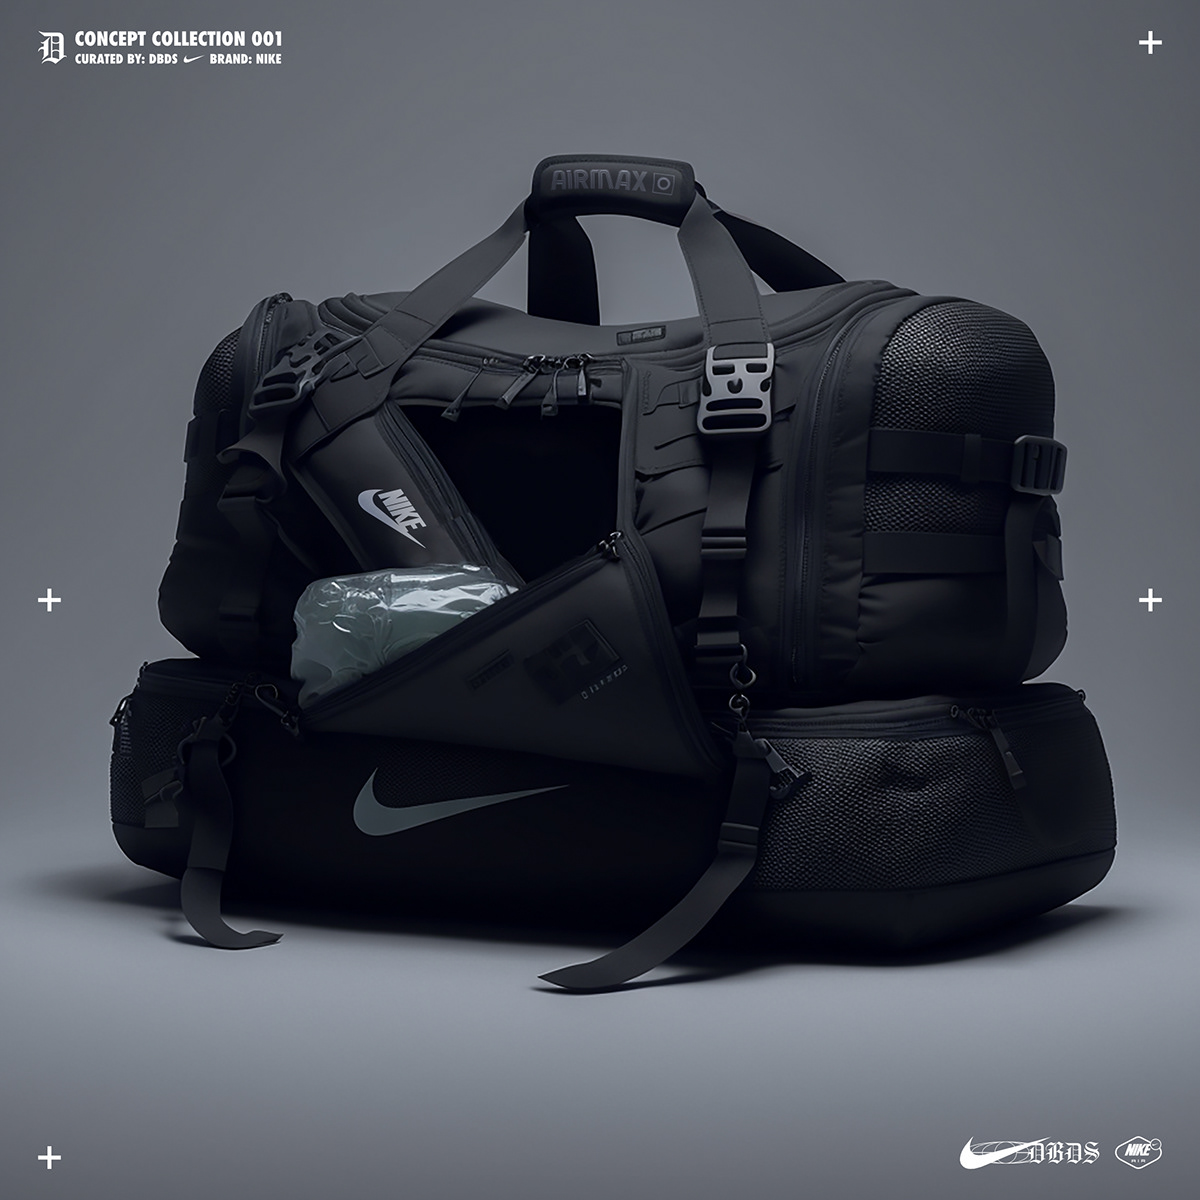 NIKE AW23 DUFFLE BAGS — byDBDS® on Behance